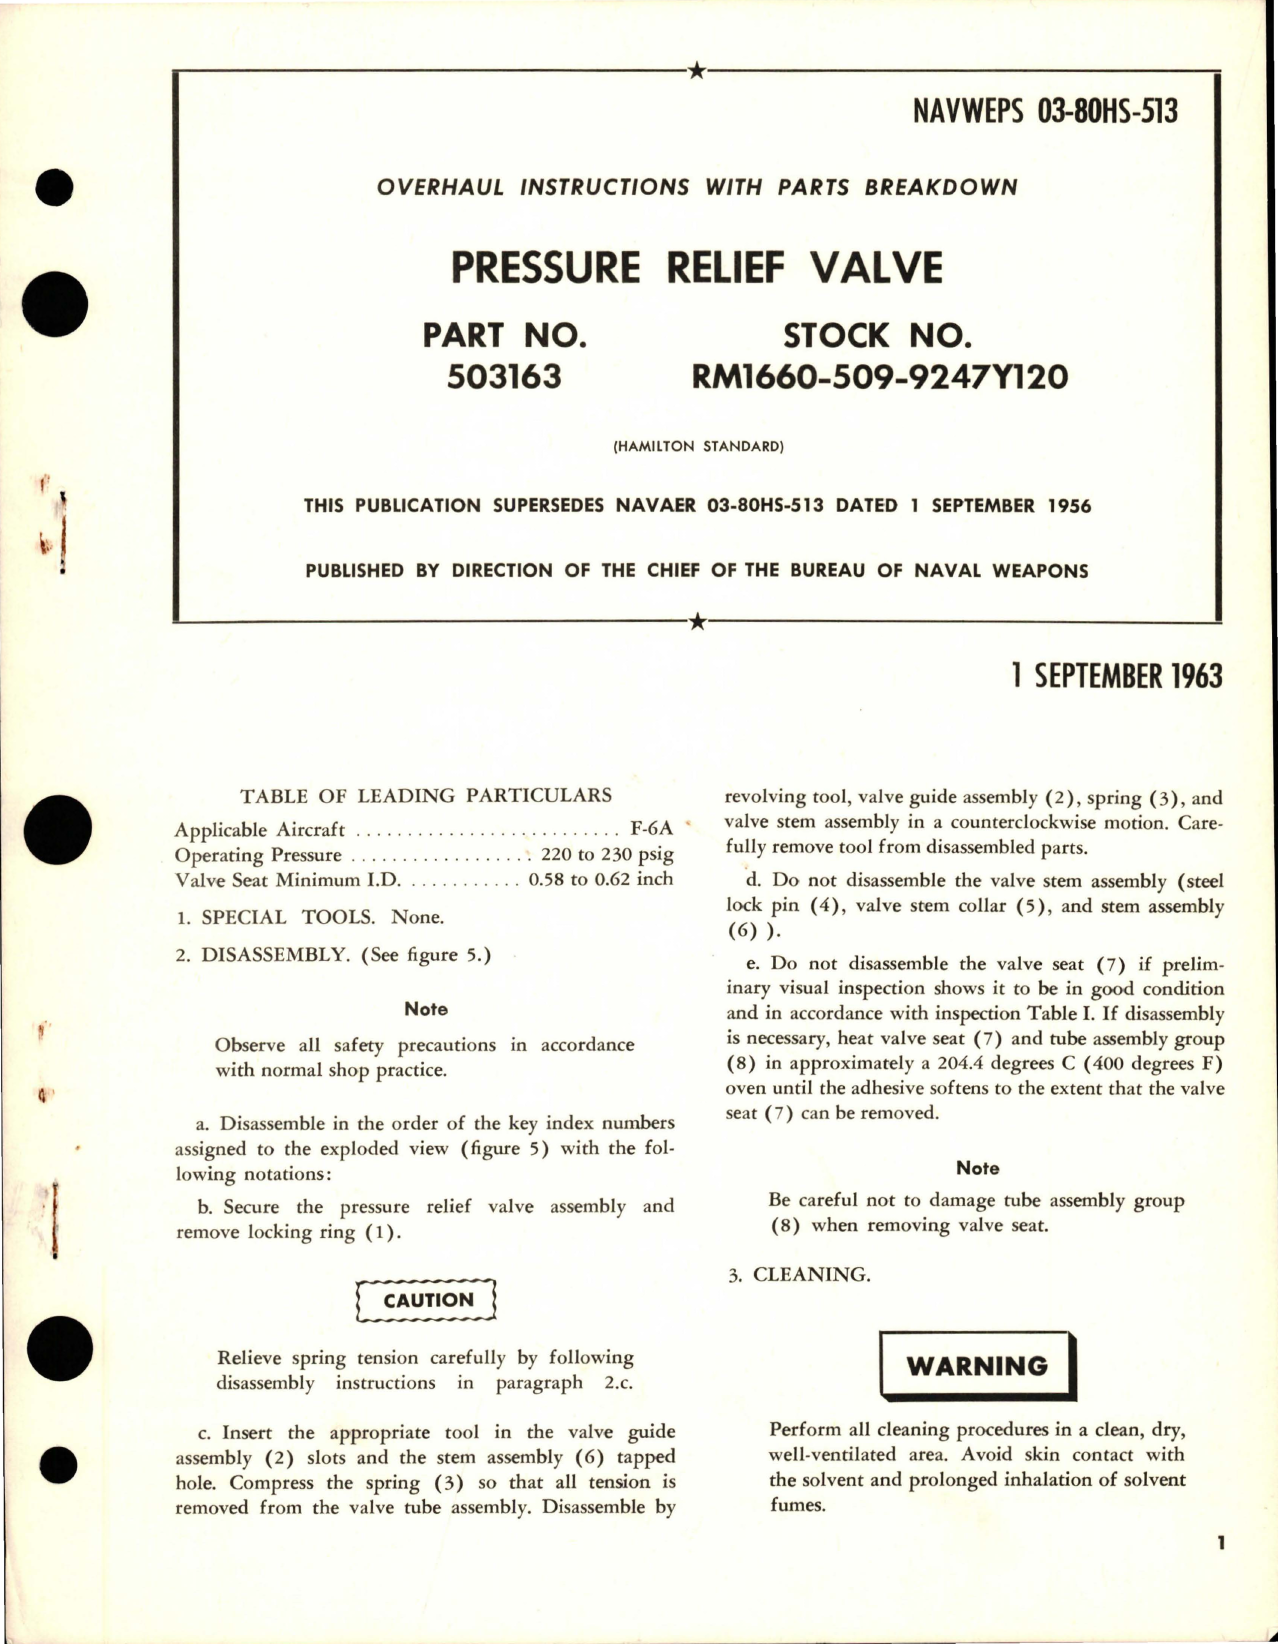 Sample page 1 from AirCorps Library document: Overhaul Instructions with Parts Breakdown for Pressure Relief Valve - Part 503163 